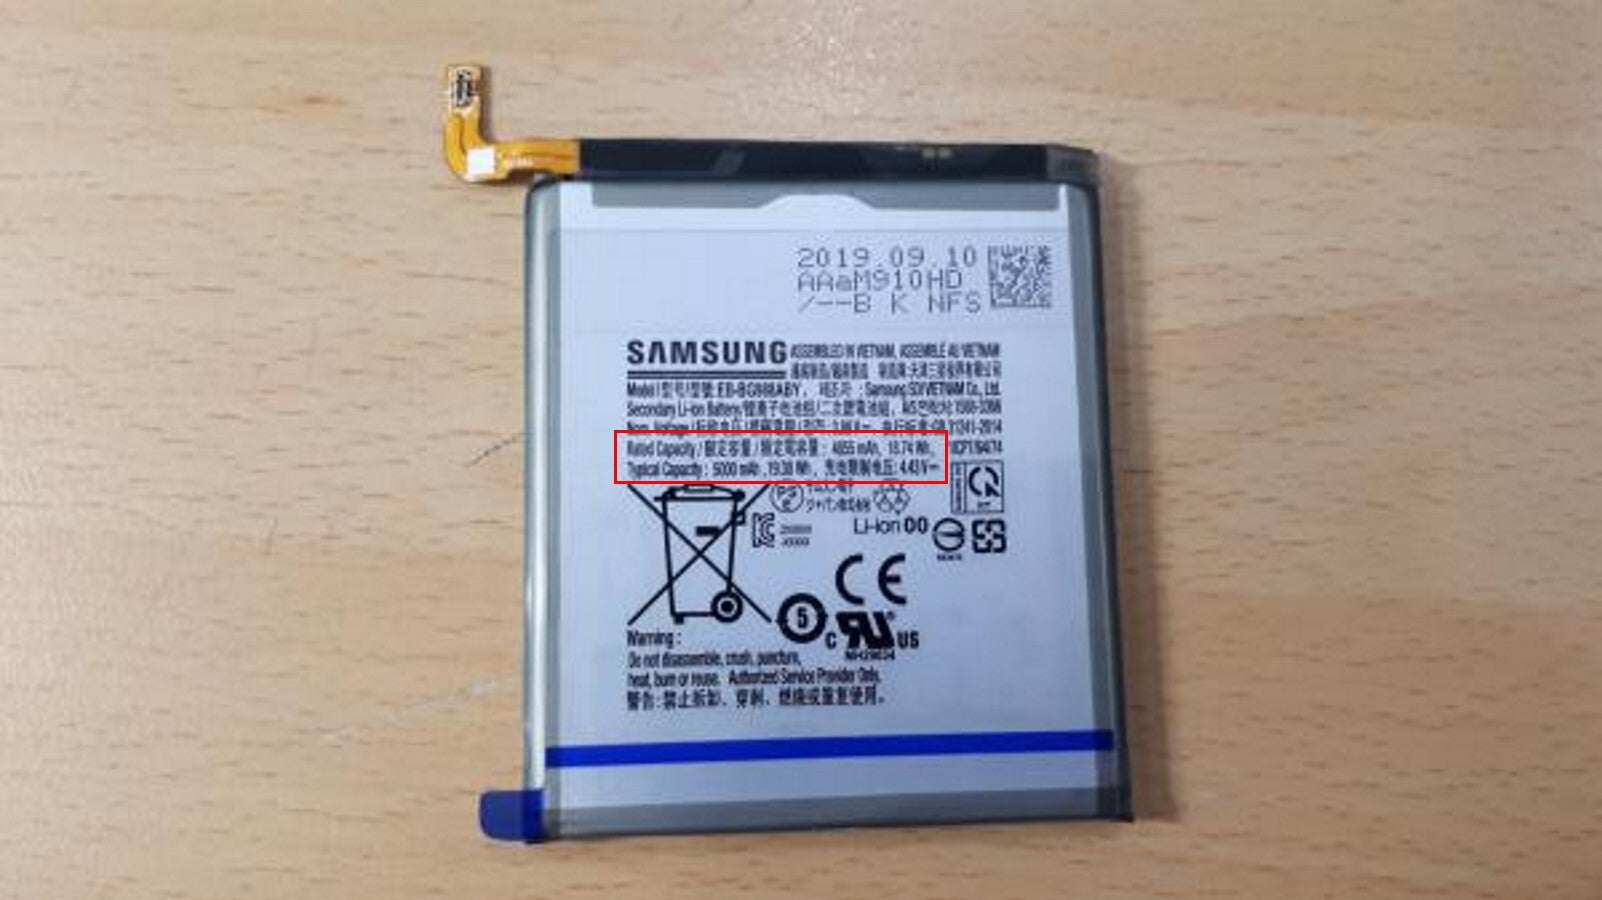 The FCC confirms that this 5000mAh unit is indeed the Galaxy S20 Ultra battery pack - We pit the Galaxy S20+ Snapdragon vs Exynos benchmarks, confirm massive S20 Ultra battery